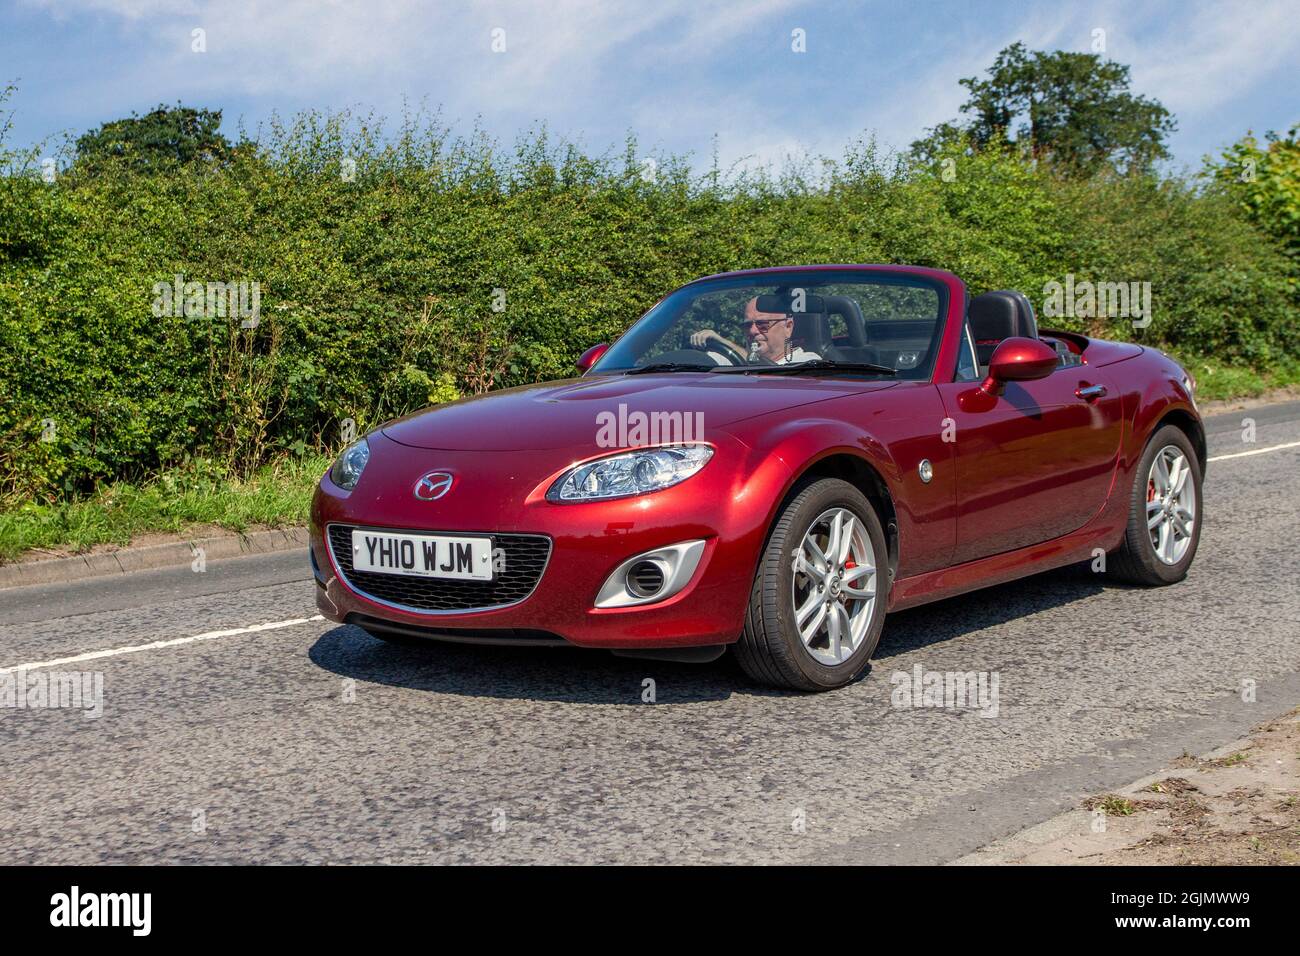 2010 red Mazda MX-5 i Roadster SE 1798cc petrol en-route to Capesthorne Hall classic July car show, Cheshire, UK Stock Photo